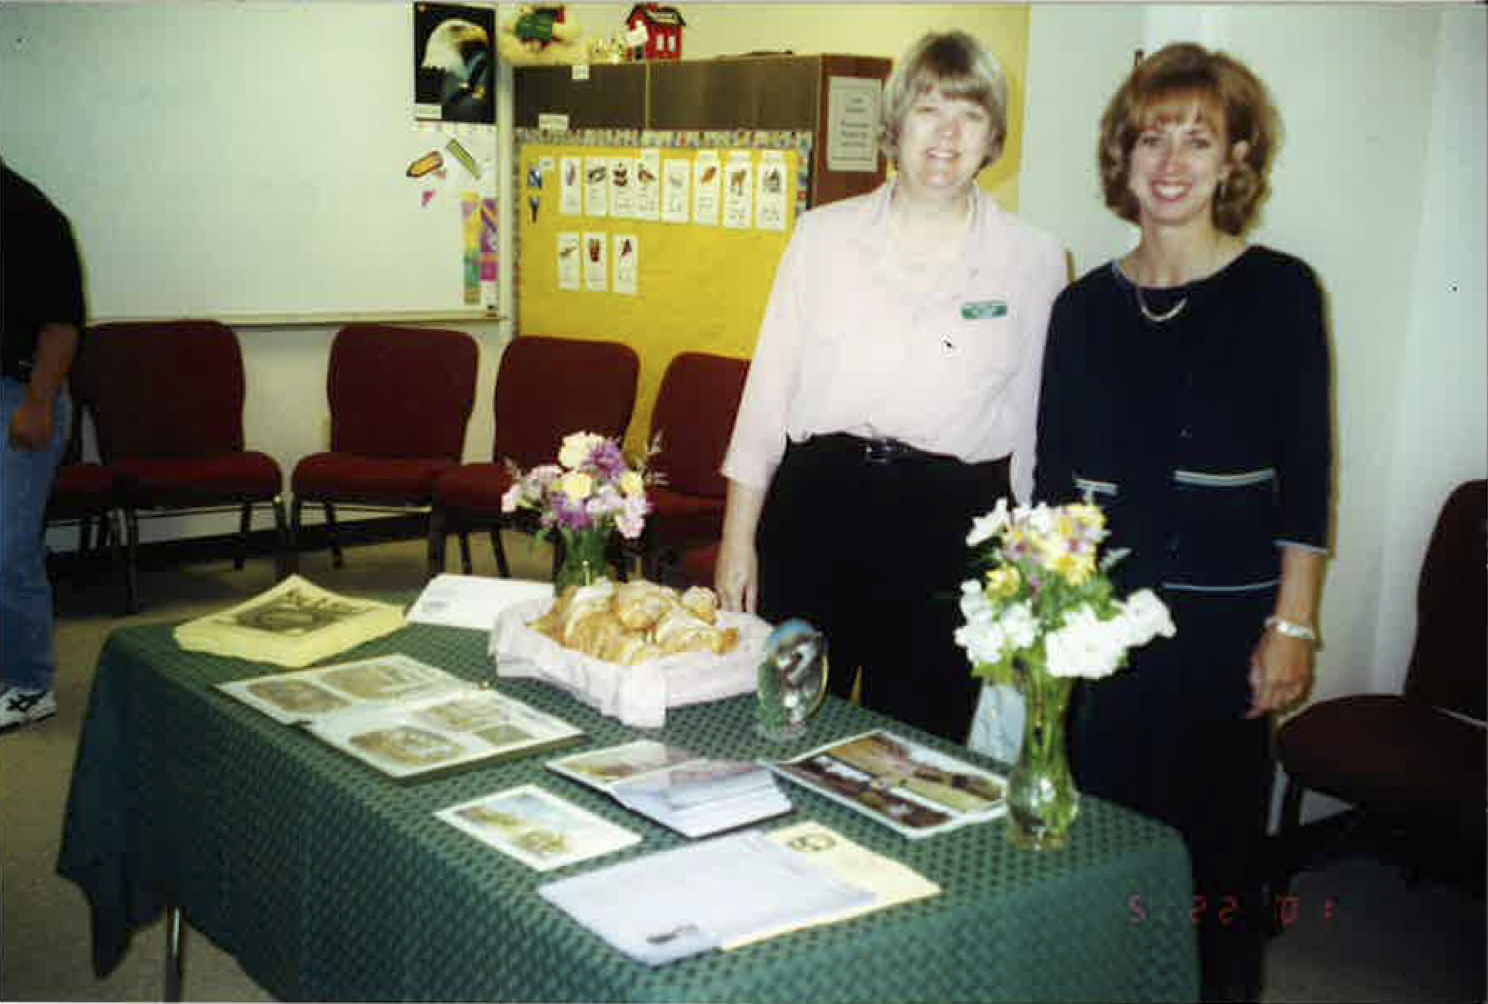 Lin Mayberry and Robin Buffington, two long-time teachers and friends at Legacy Christian Academy standing behind a table